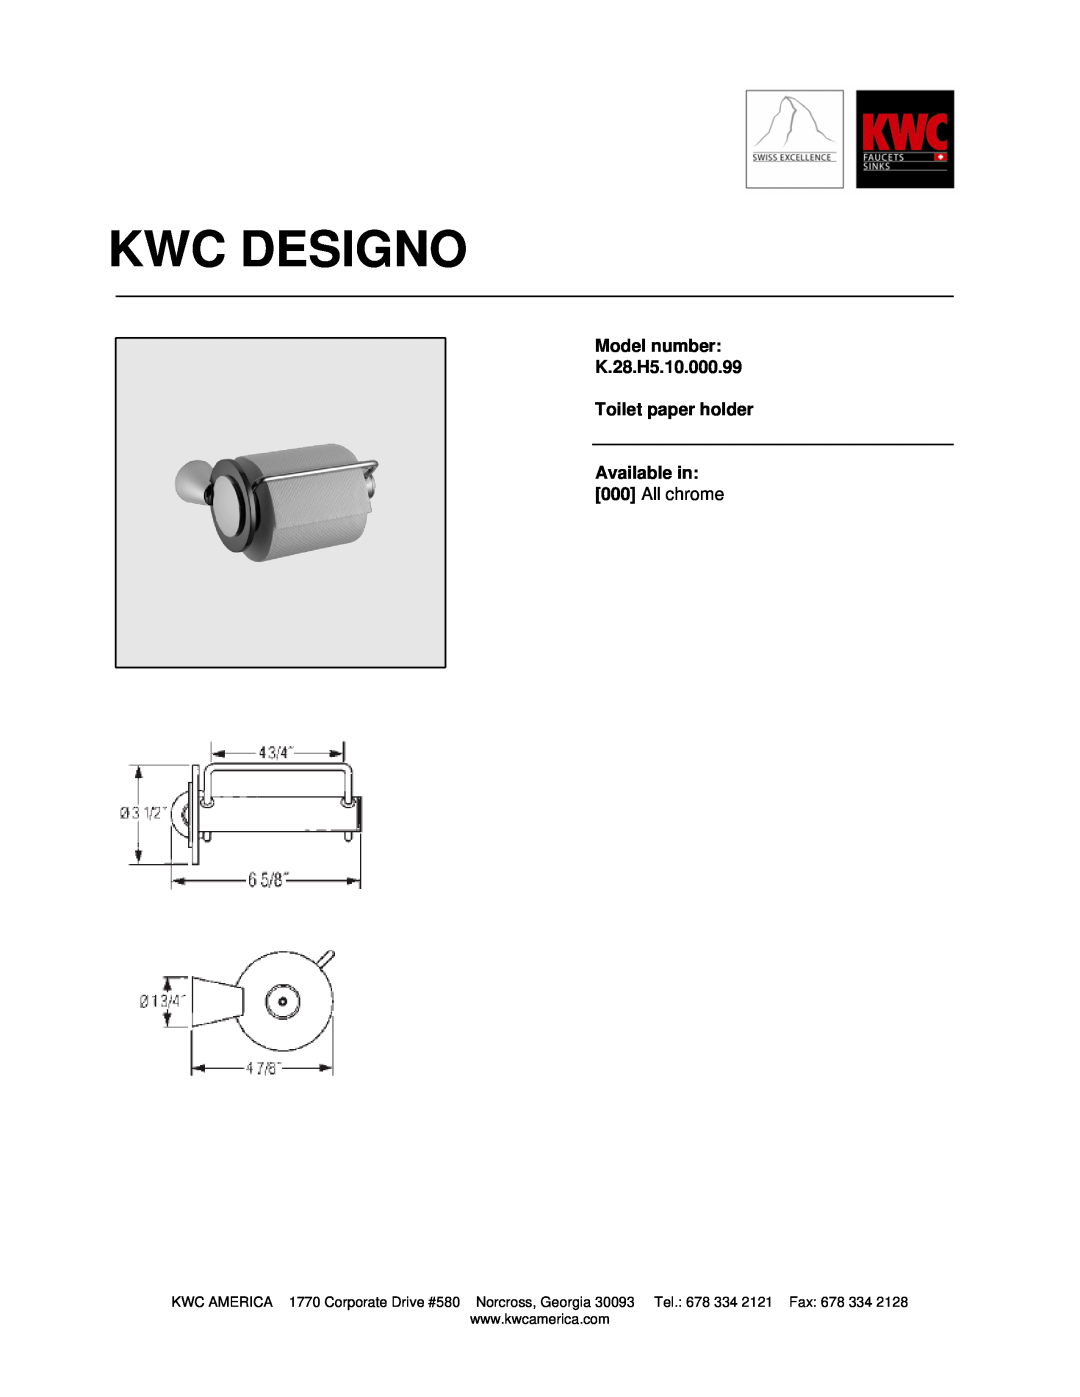 KWC manual Kwc Designo, Model number K.28.H5.10.000.99, Toilet paper holder Available in 000 All chrome 